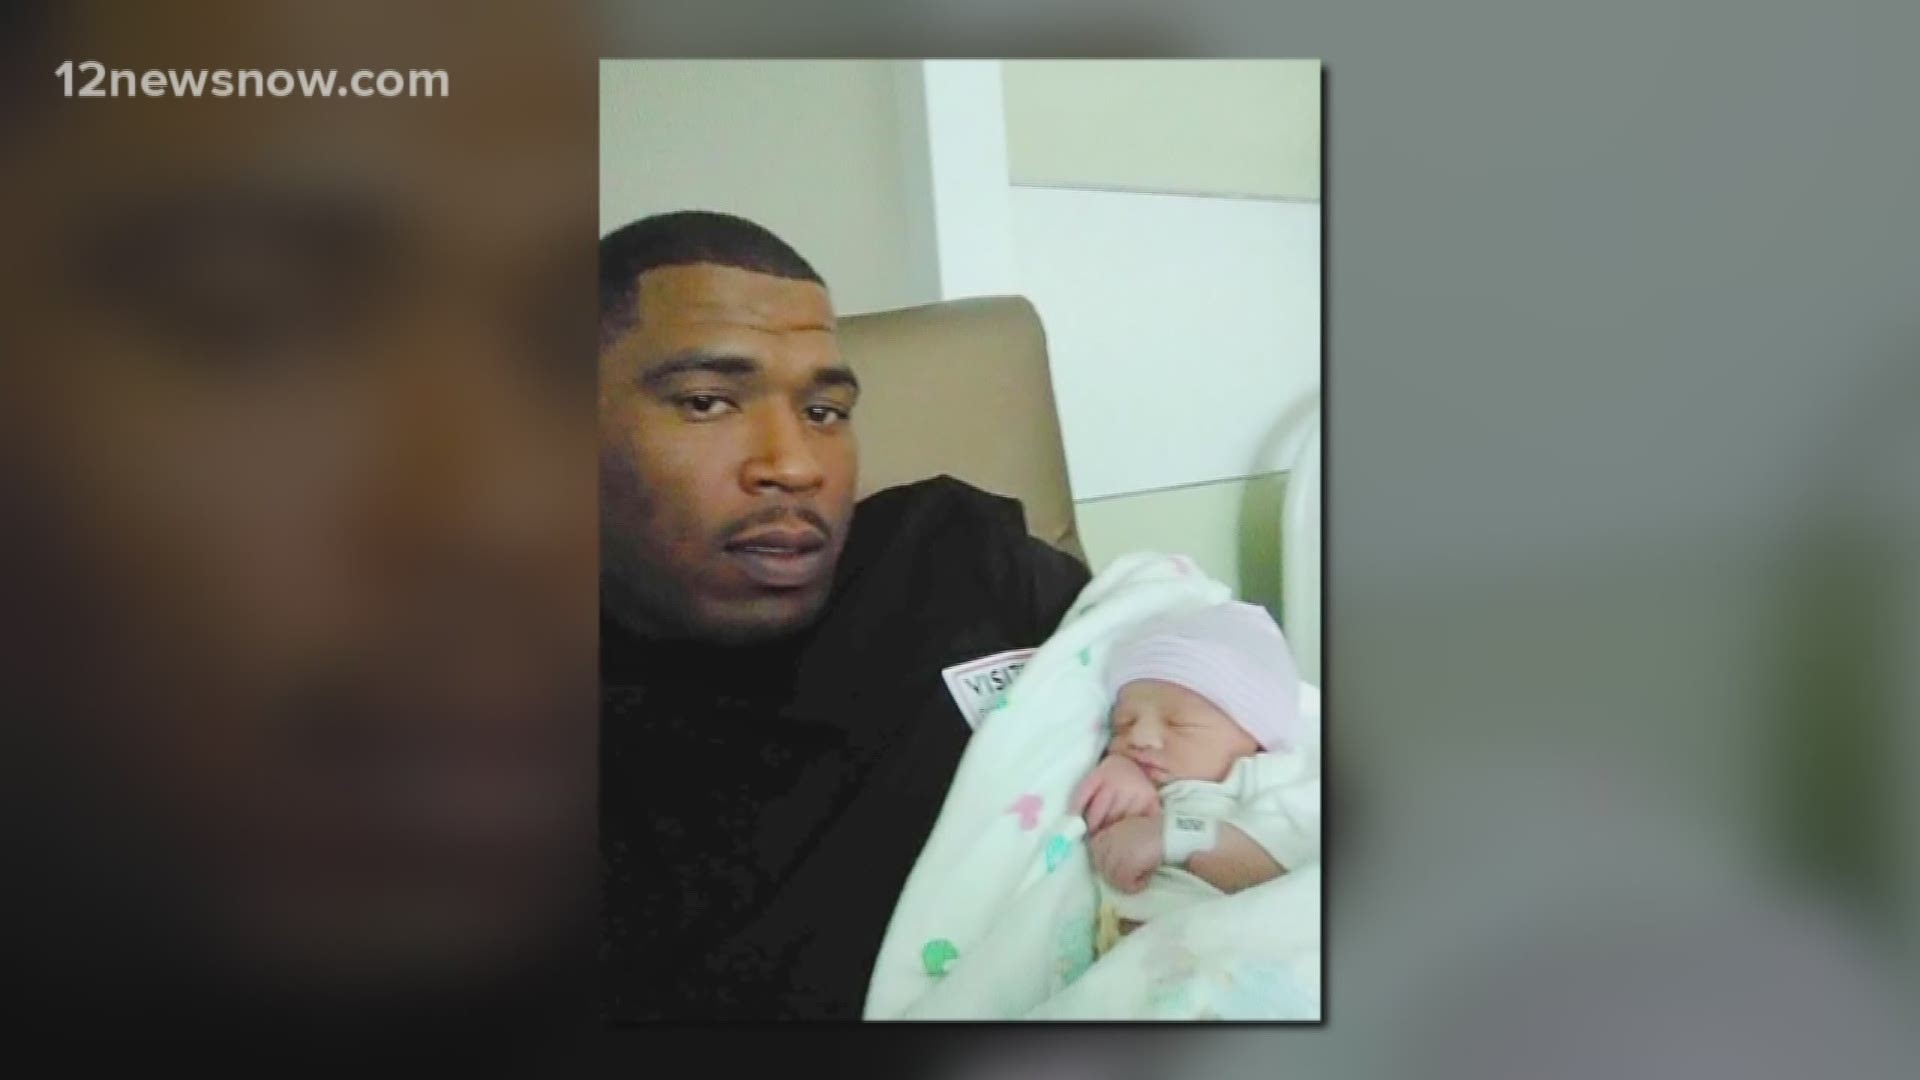 A family is now left with questions about what happened in the moments before their loved one was shot and killed.